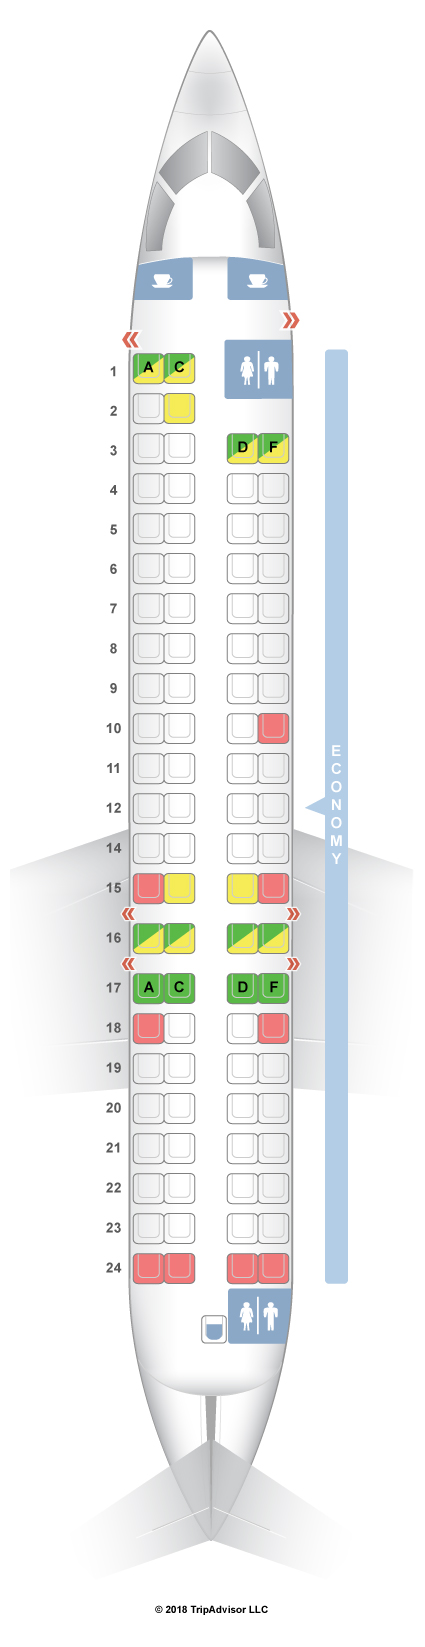 Challenger 890 Seating Chart